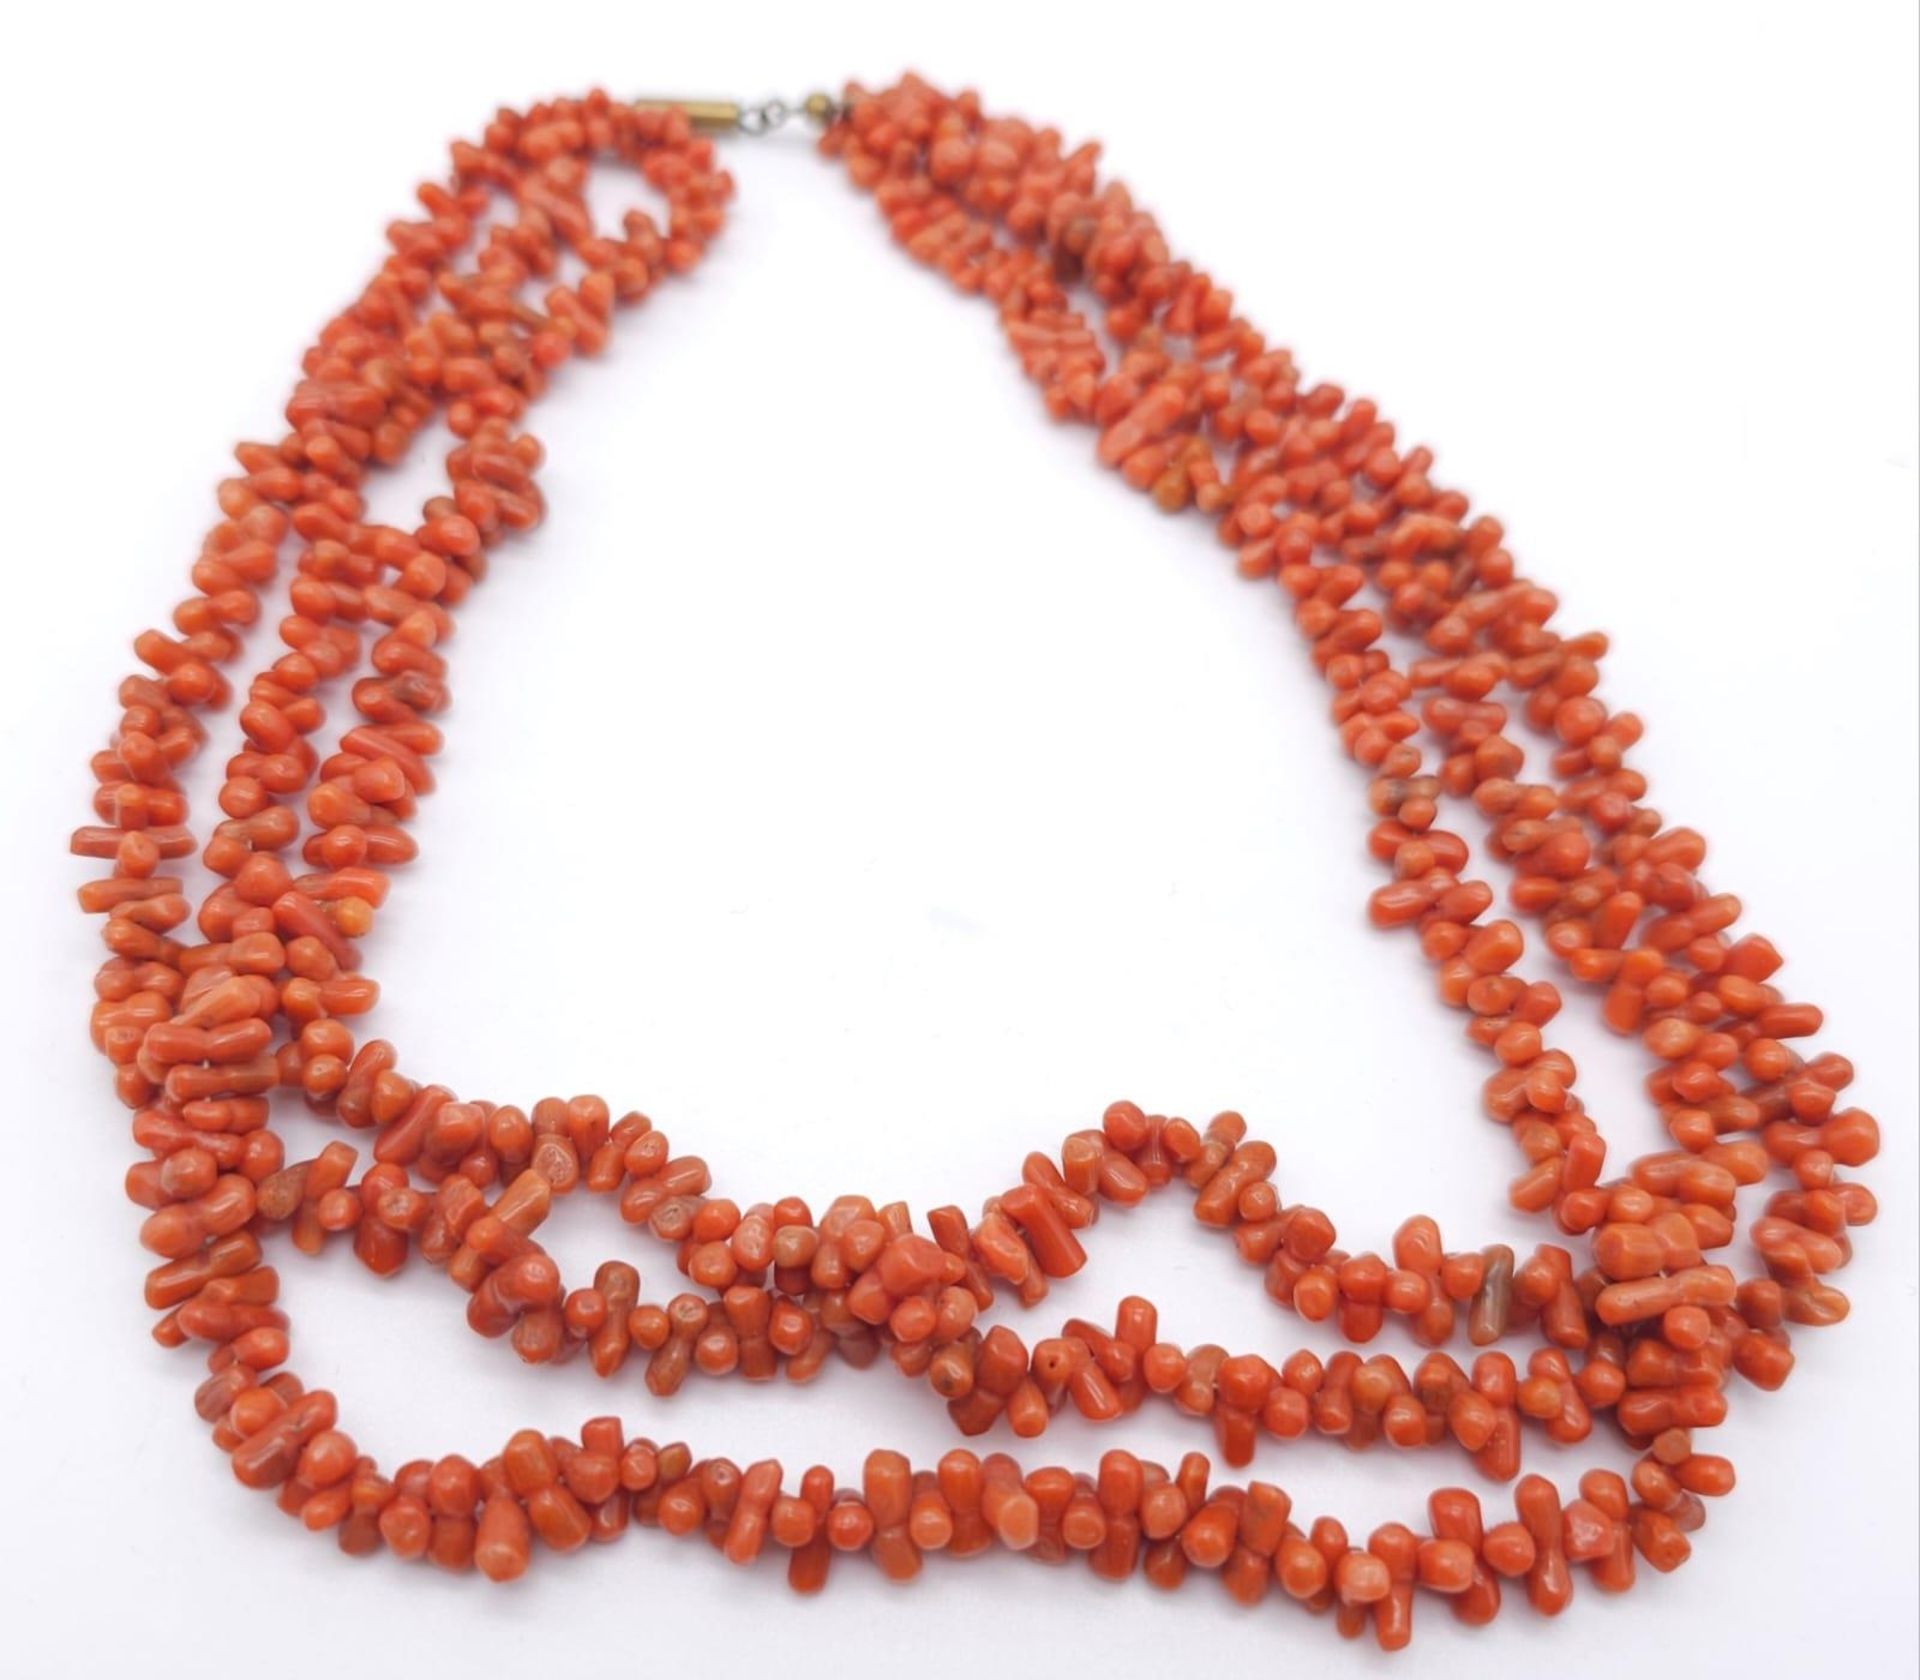 Three Strand Orange Coral Necklace. Measuring 42cm in length, this bold necklace is a bright